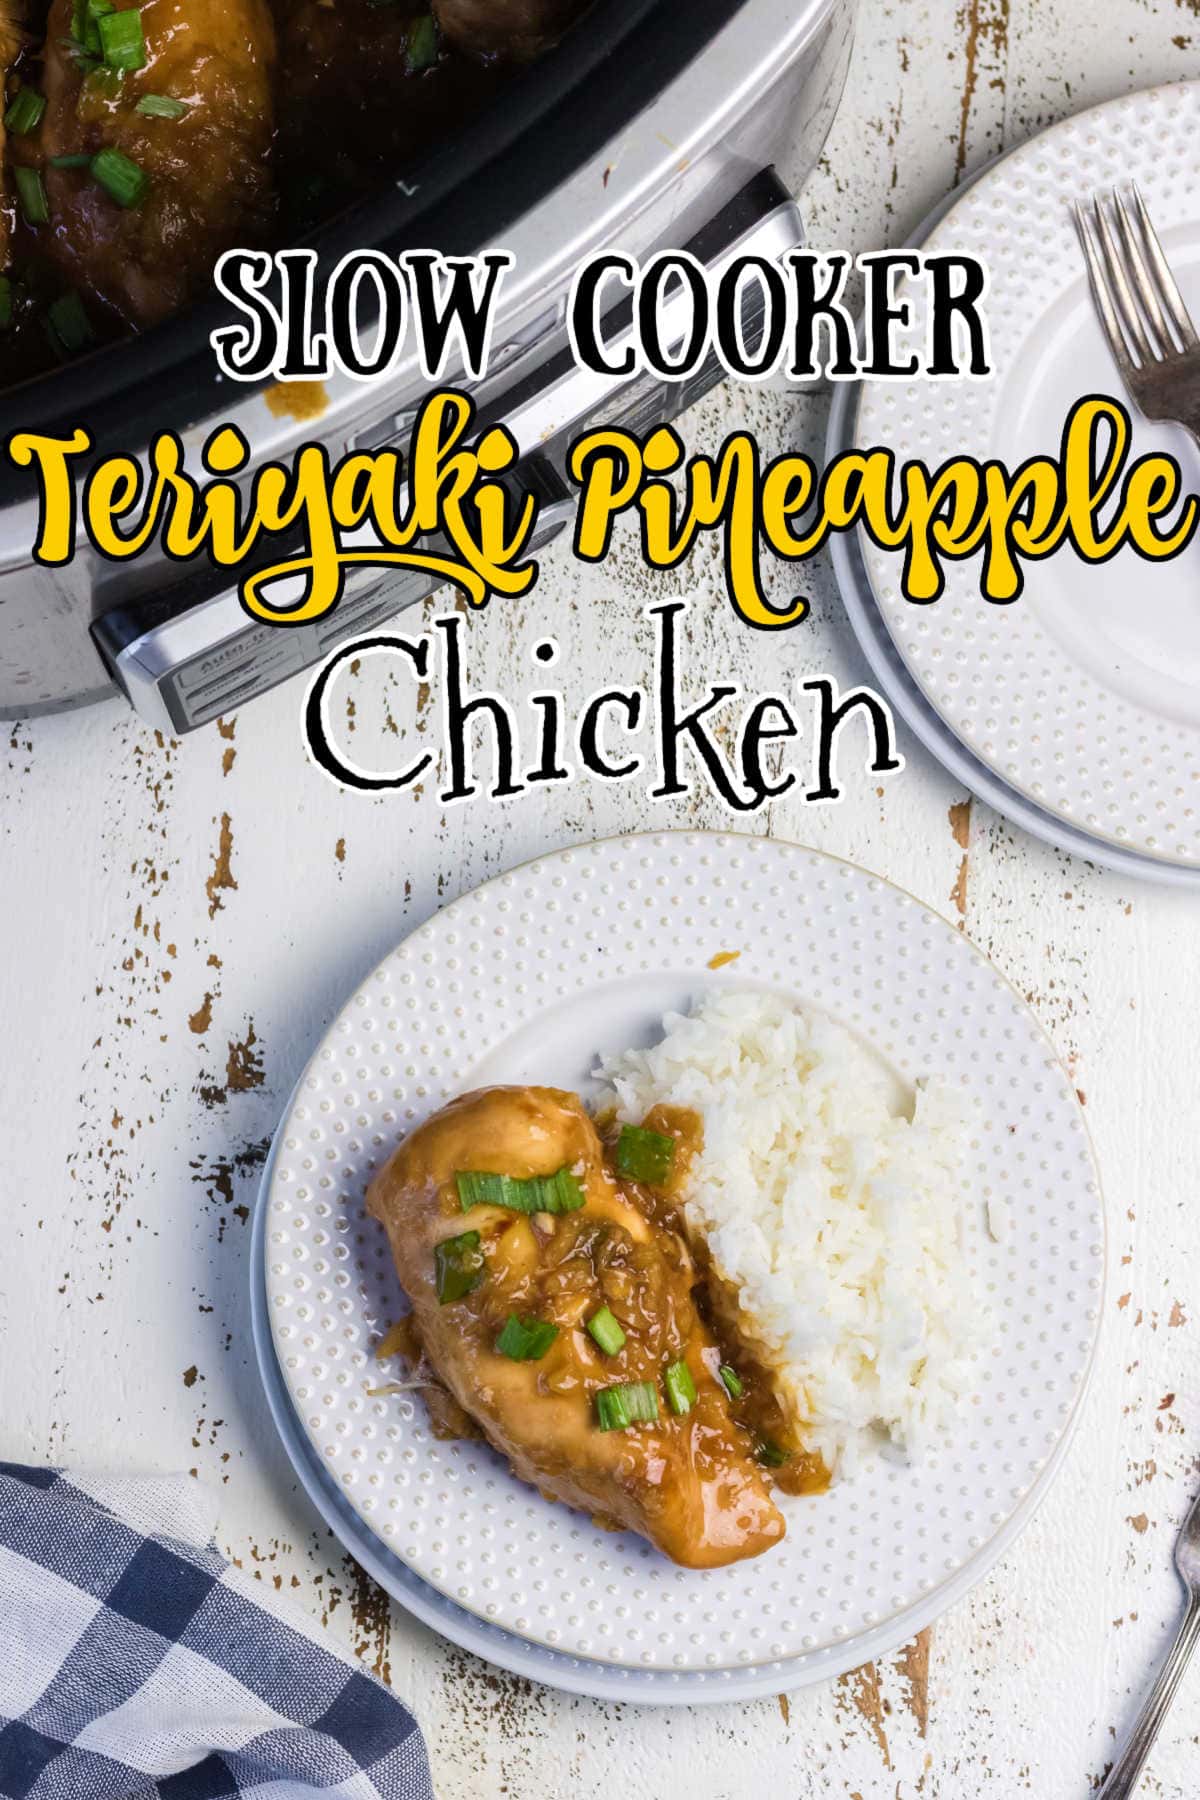 Overhead view of Crock Pot chicken teriyaki on a plate with title text overlay.